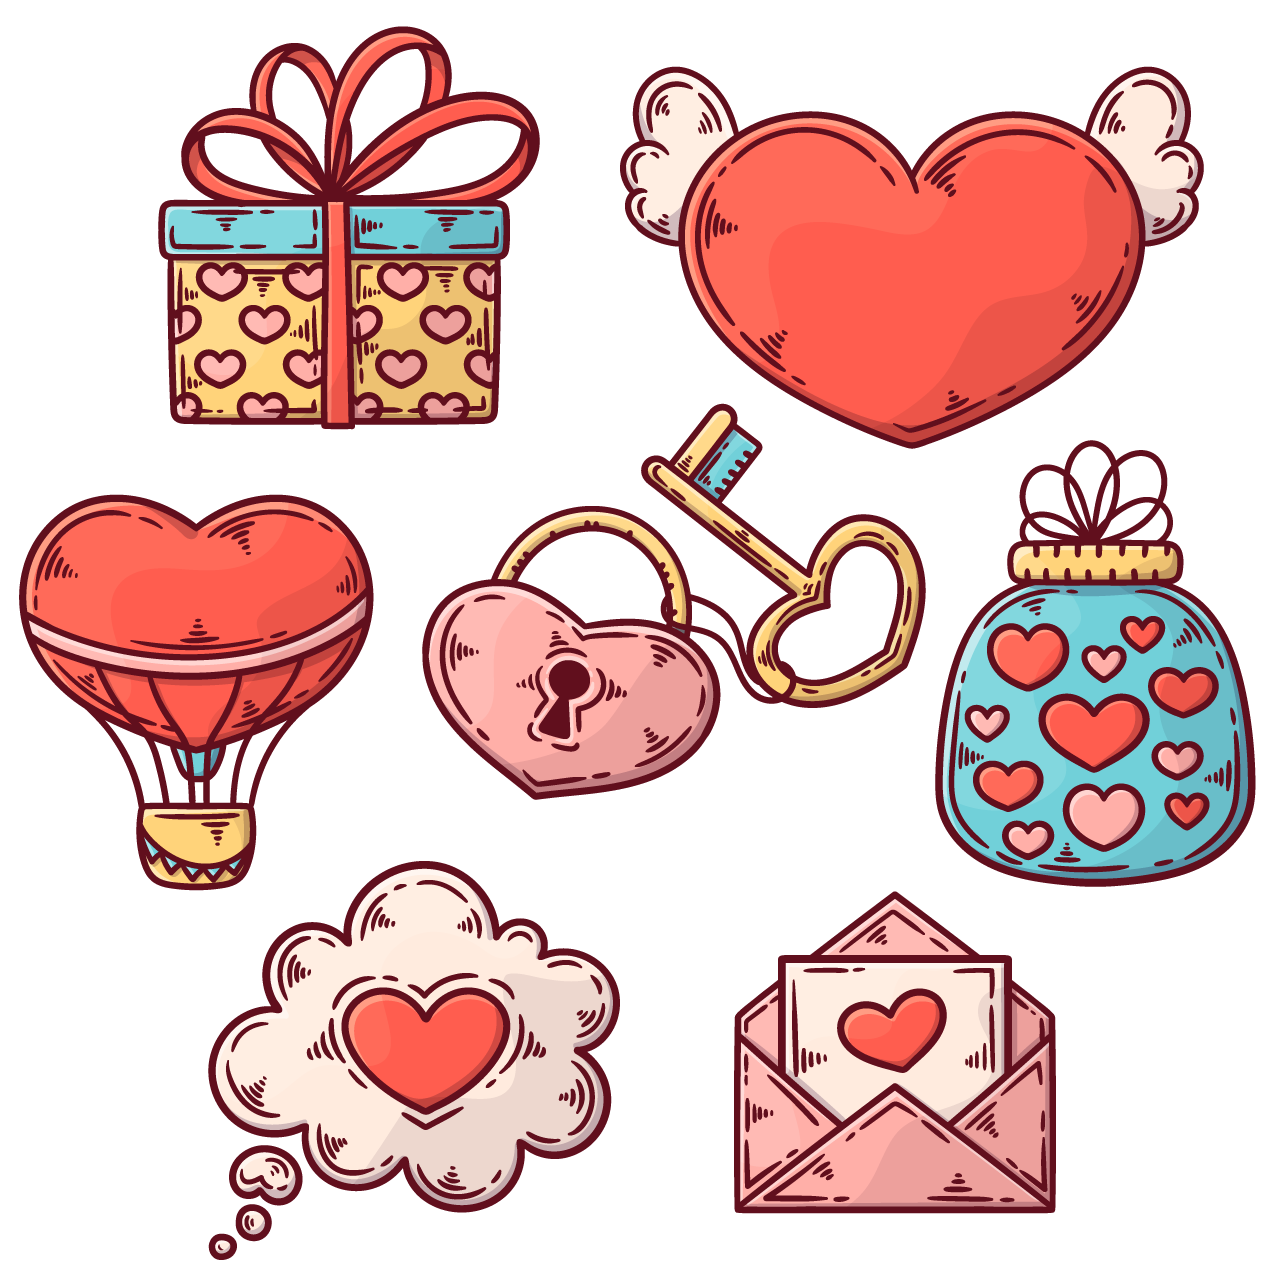 Love heart clipart hand drawn valentines day elements collection